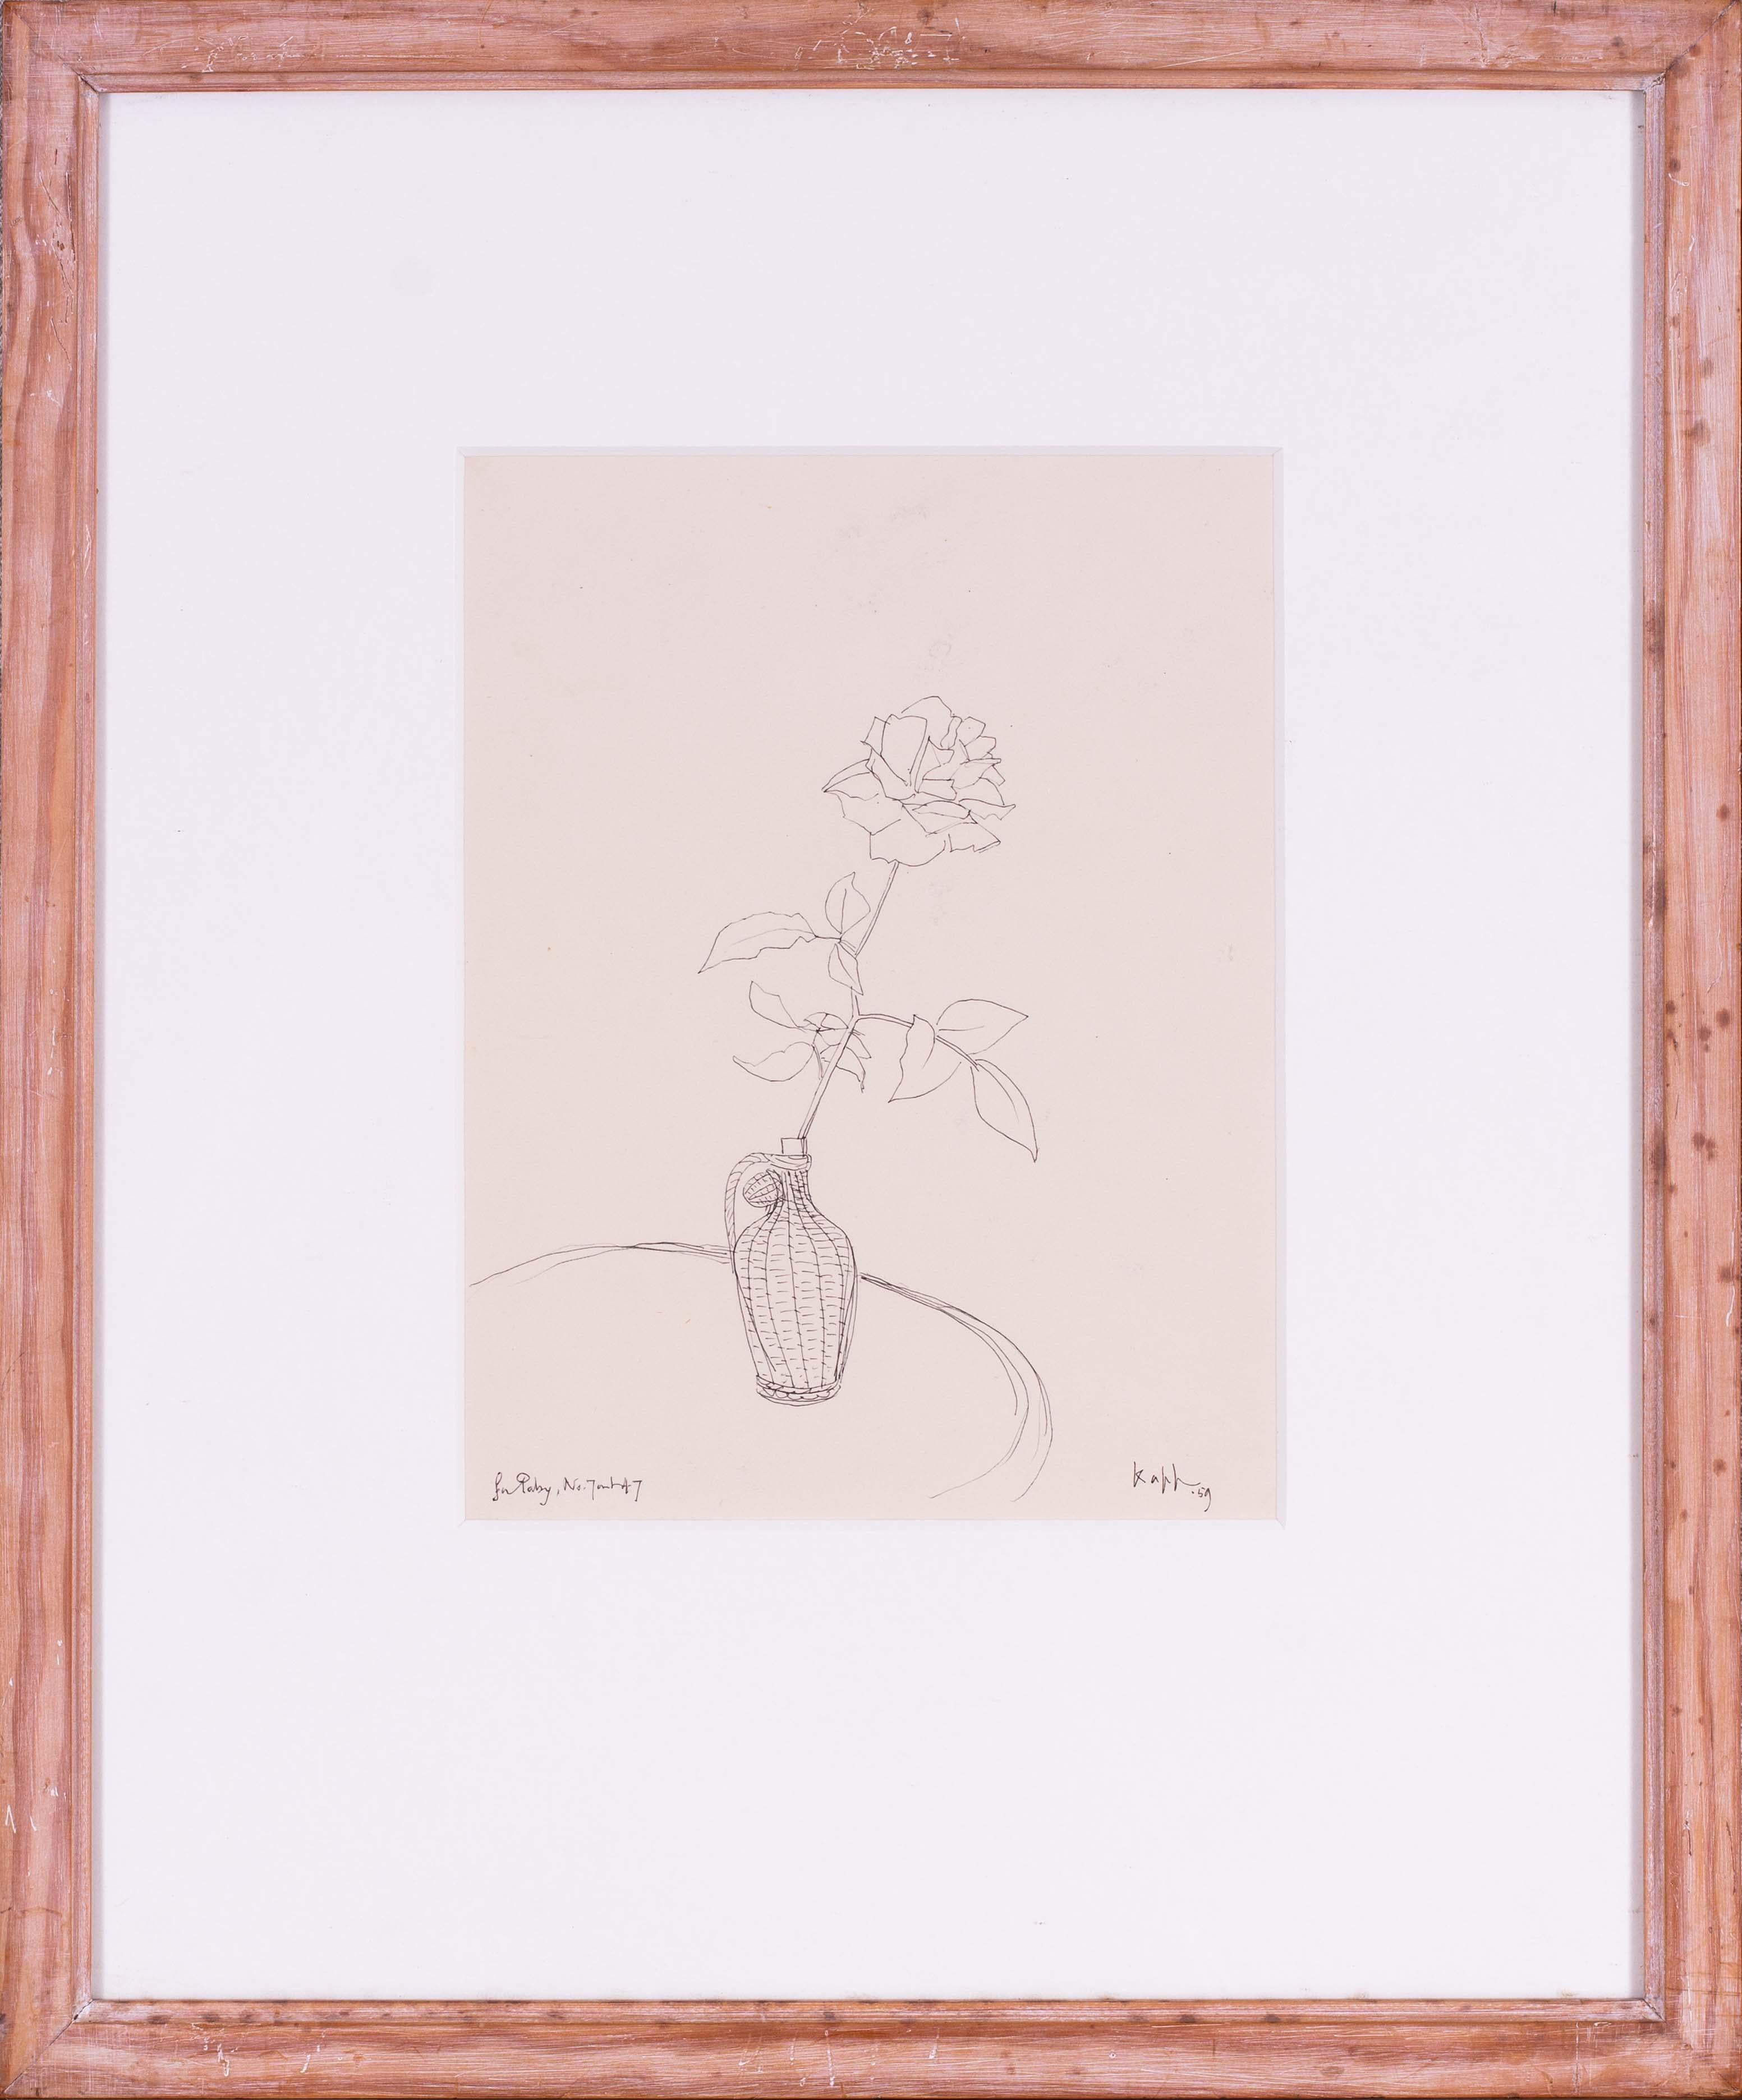 Eduard Xavier Kapp (British, 1890 – 1978)
Rose in bottle
Ink pen
Signed, inscribed and dated ‘For Paby, no7 out of 7 Kapp. 59’ (lower edge)
11 x 8.1/4 in. (28 x 21 cm.)

Edmond Kapp was born in Islington, London, on 5 November 1890, of American and